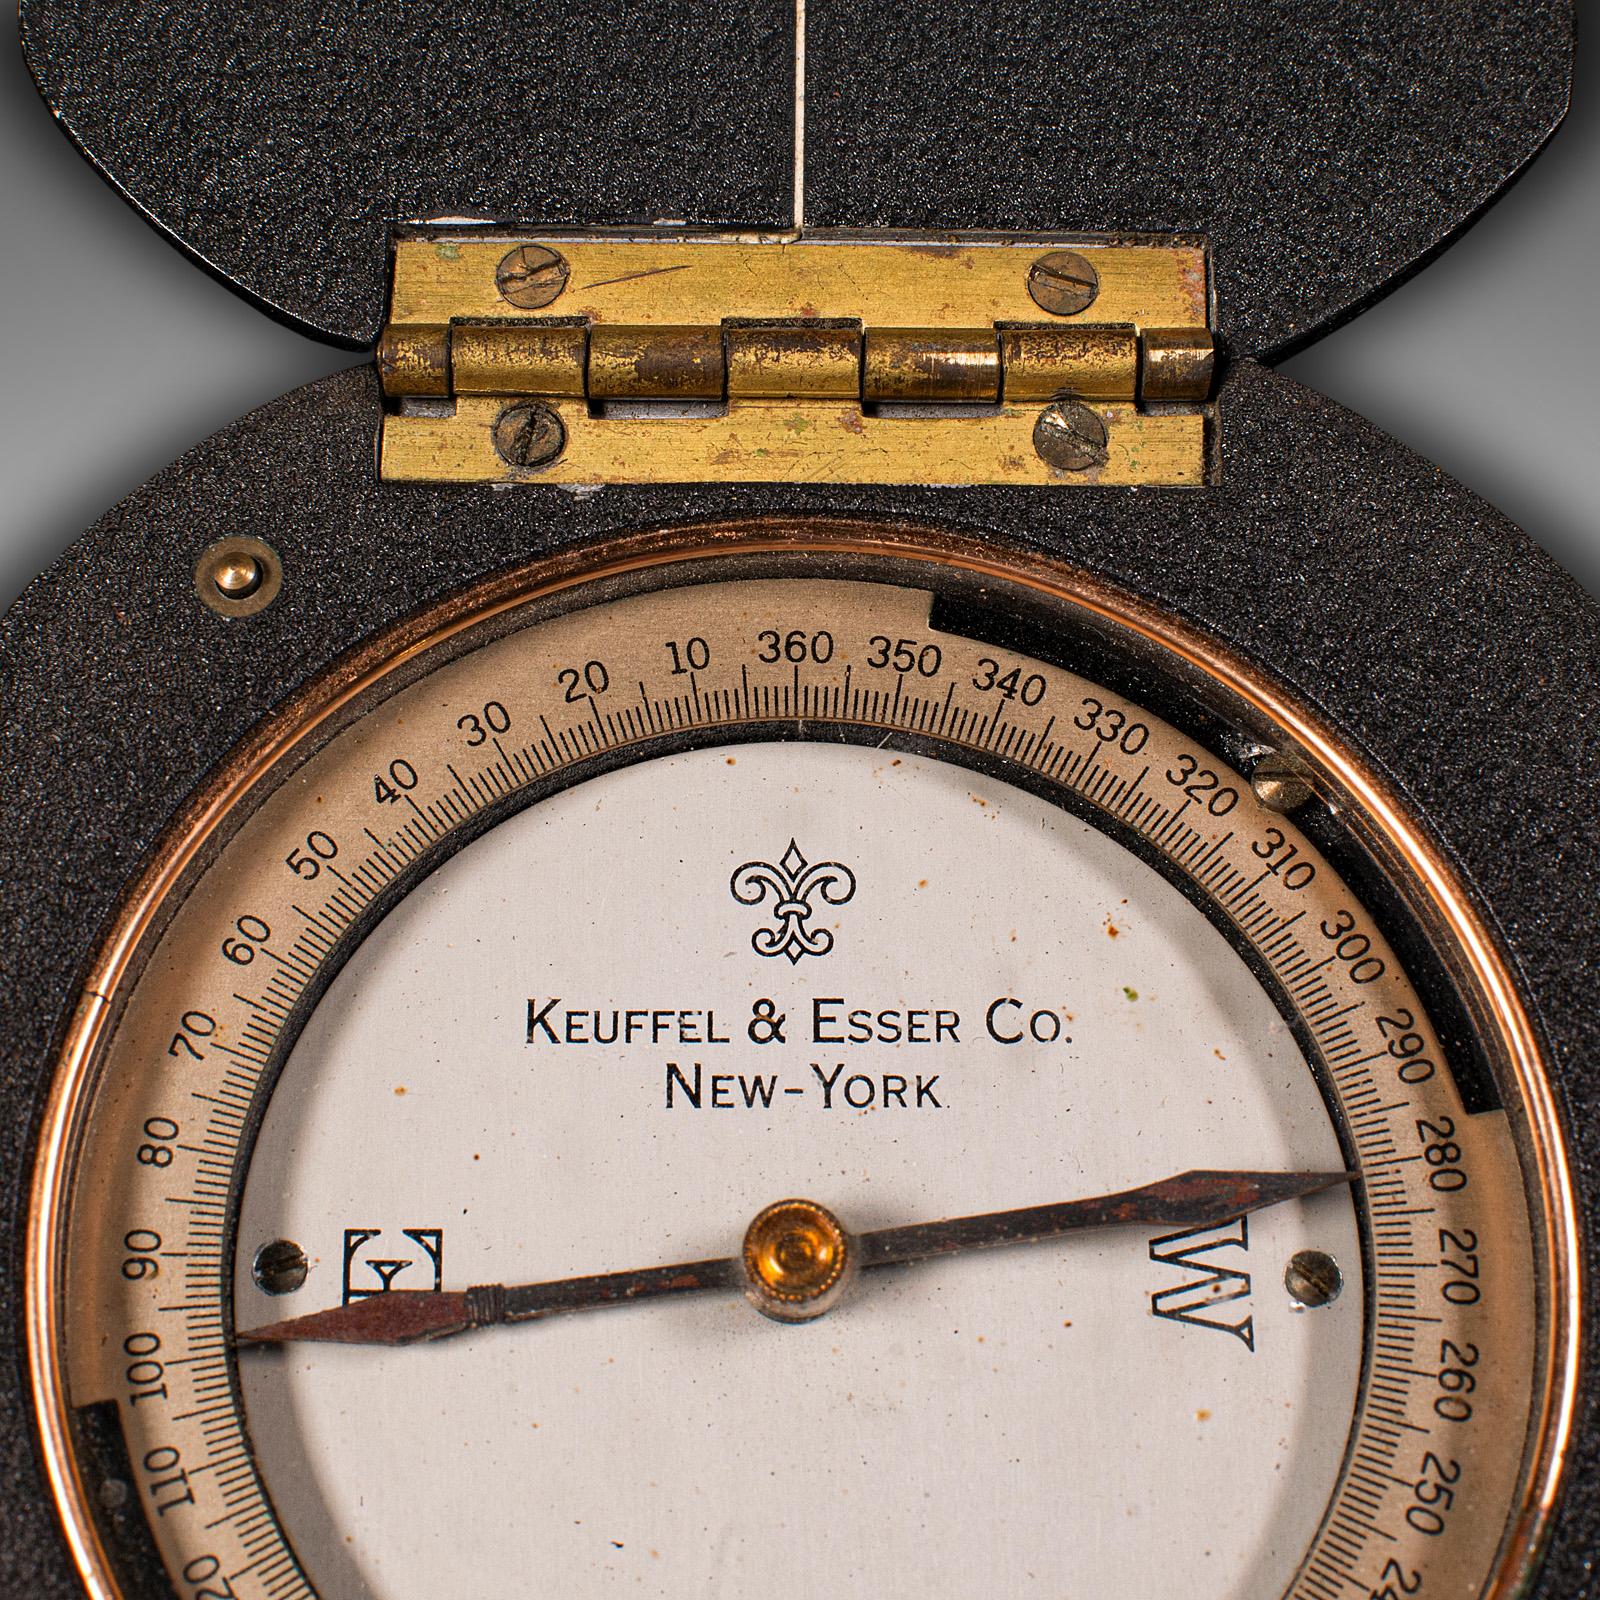 Mid-20th Century Vintage Military Compass, American, Navigation Aid, Keuffel & Esser, 5600X Model For Sale